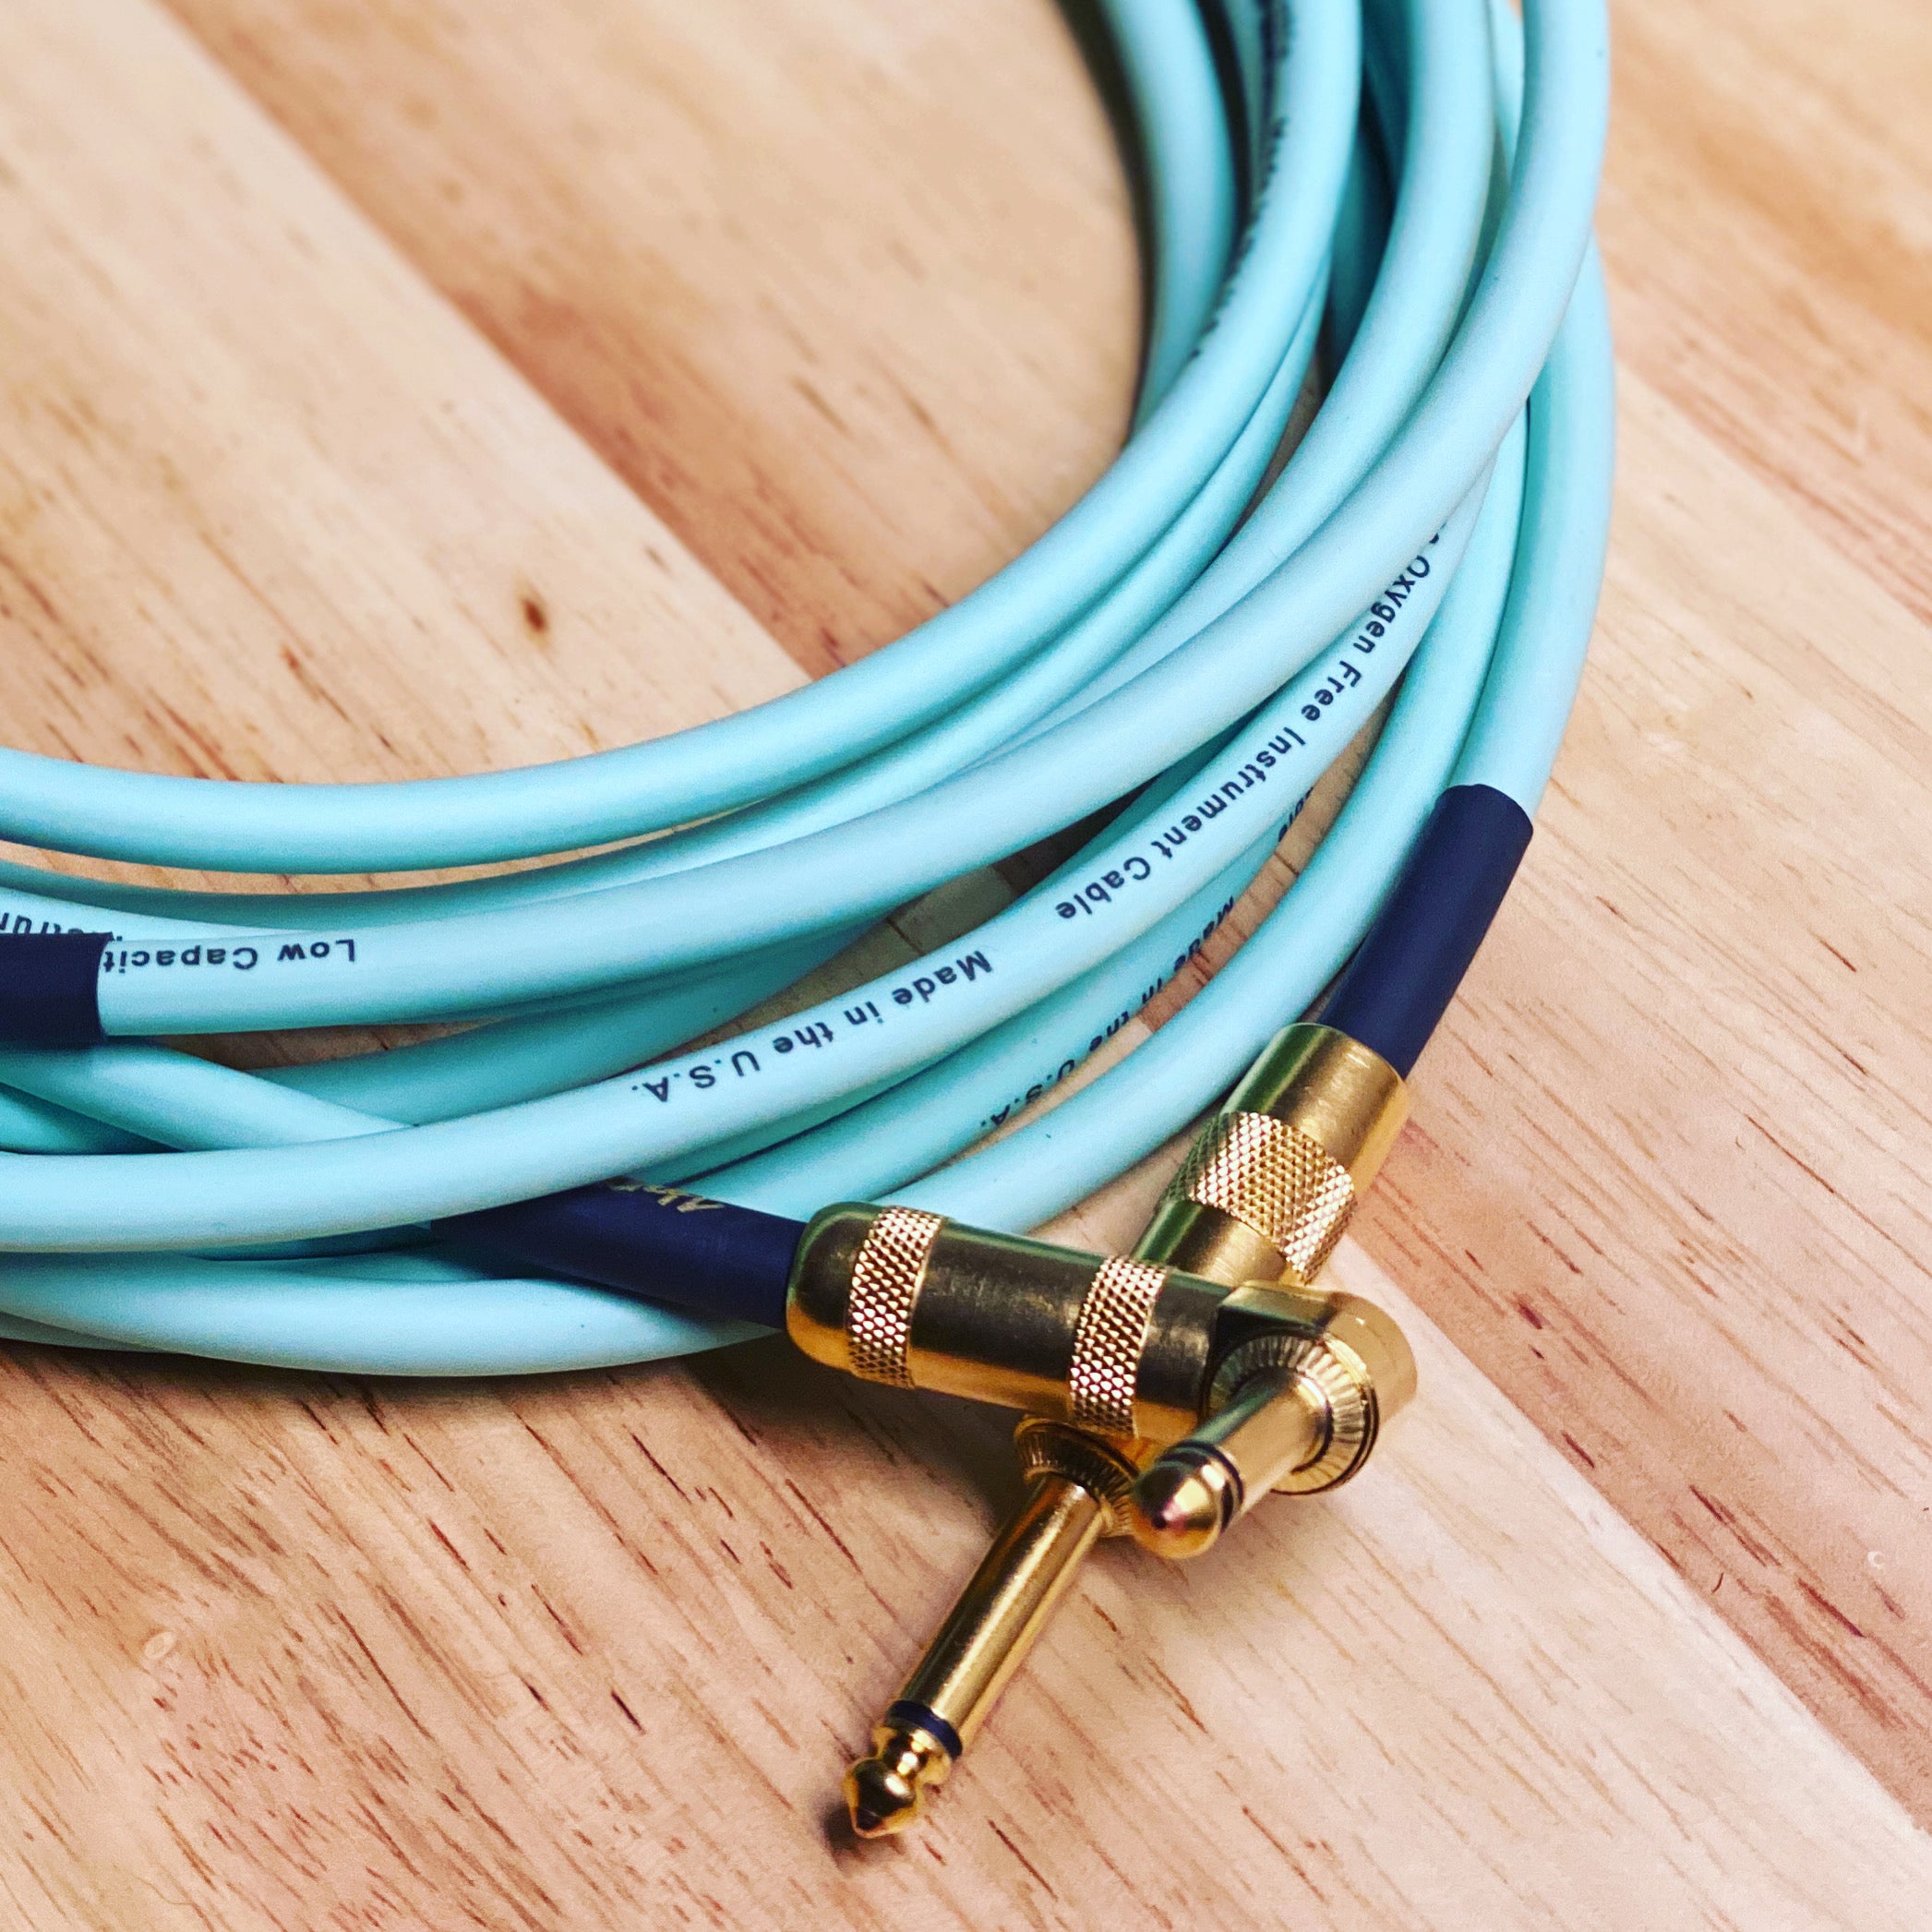 Core Series Instrument Cable